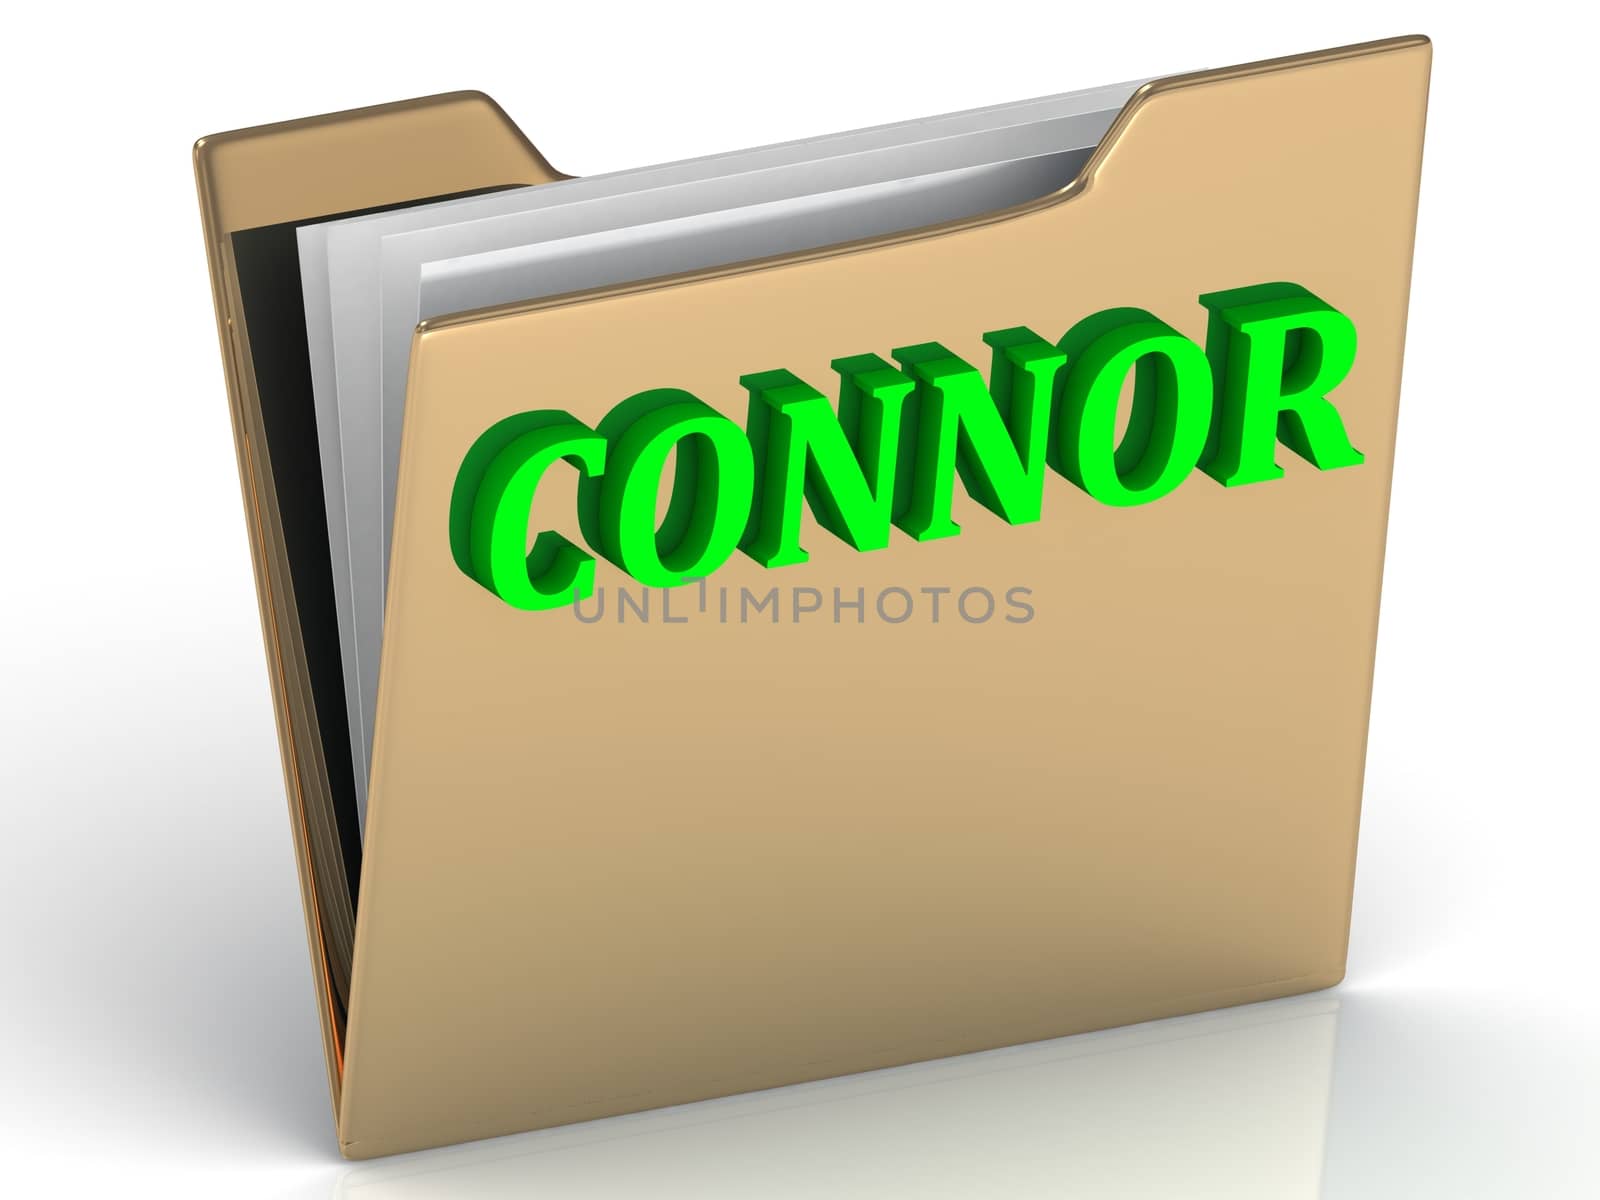 CONNOR- bright green letters on gold paperwork folder by GreenMost